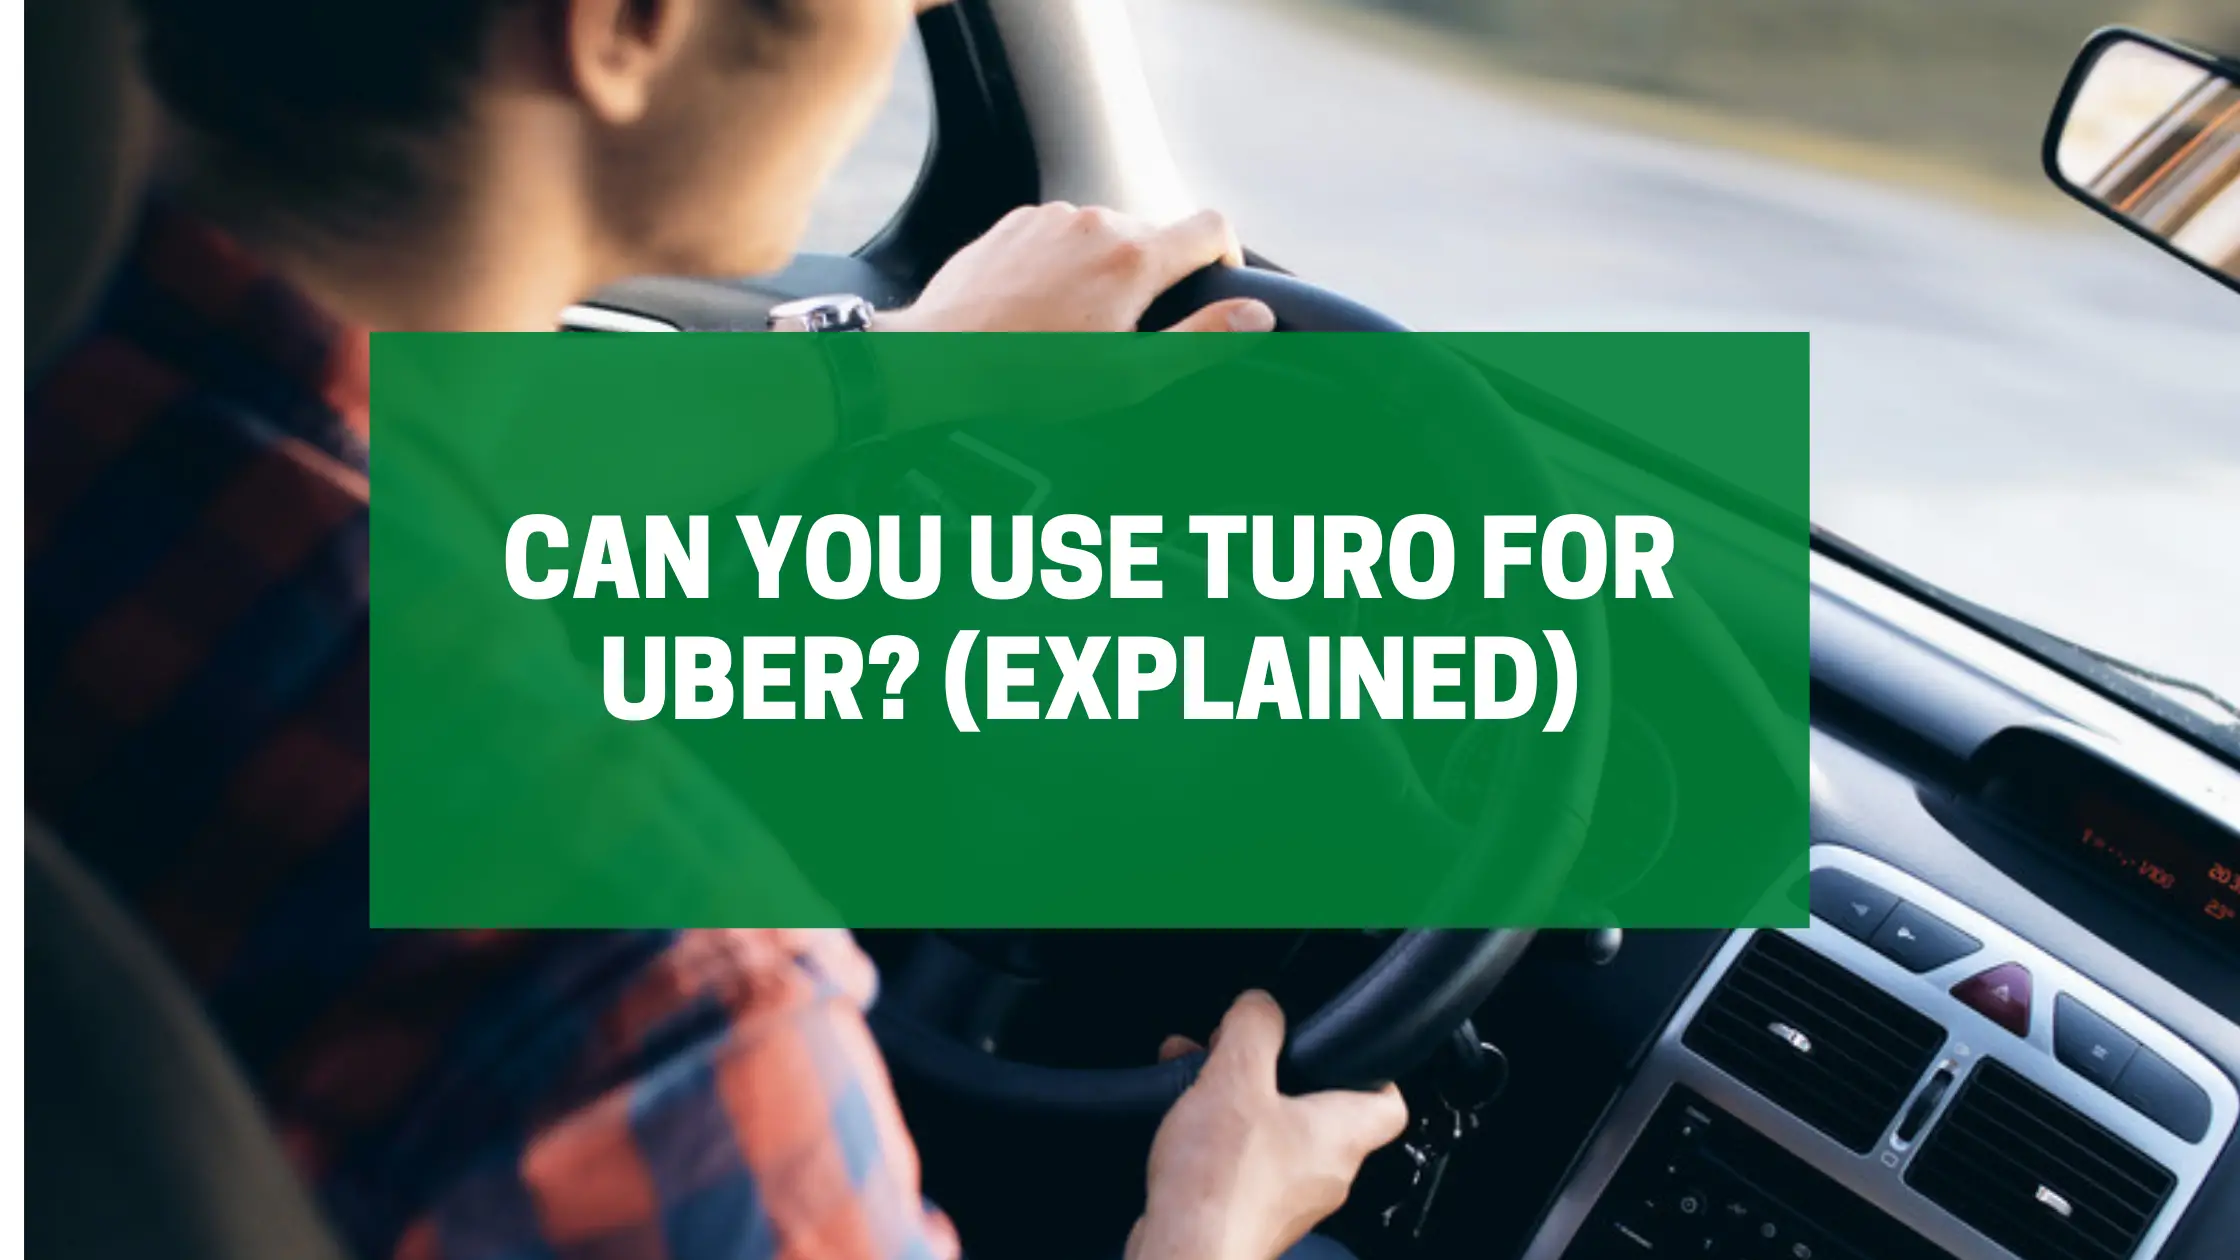 Can You Use Turo for Uber? (Explained)